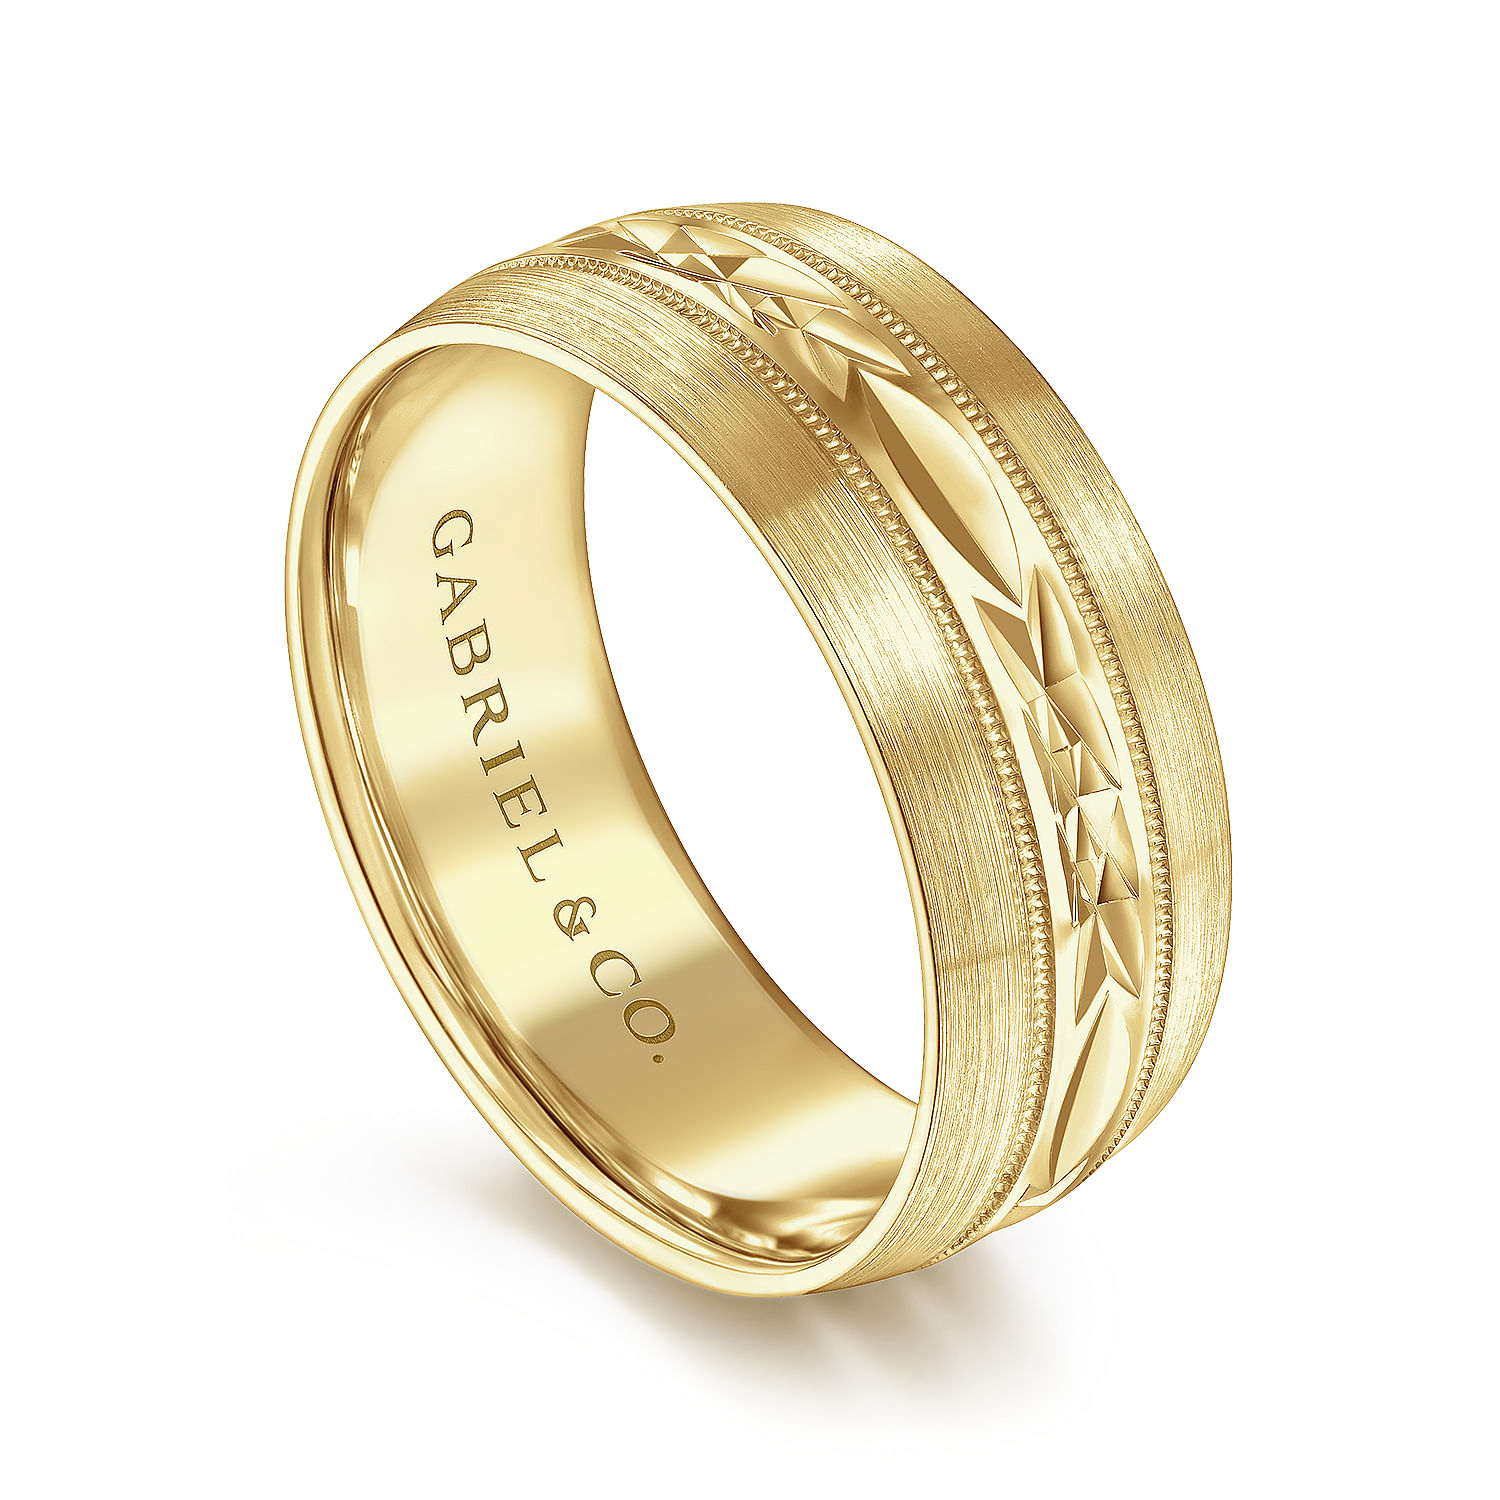 Russell - 14K Yellow Gold 8mm - Engraved Men's Wedding Band in Satin Finish - Shot 3